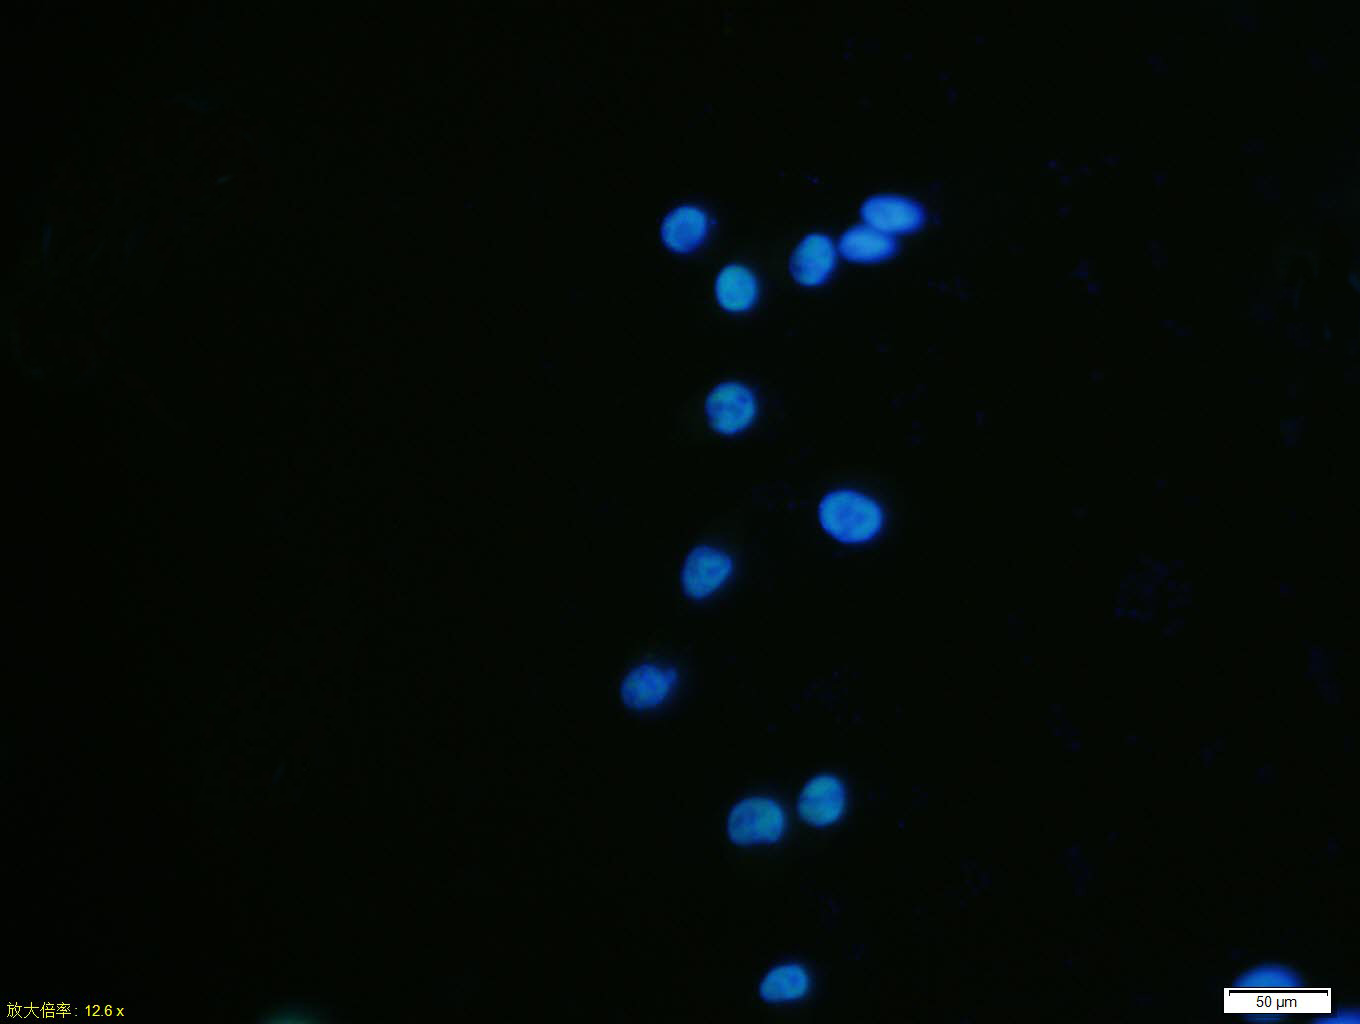 SH-SY5Y cell; 4% Paraformaldehyde-fixed; Triton X-100 at room temperature for 20 min; Blocking buffer (normal goat serum, C-0005) at 37\u00b0C for 20 min; Antibody incubation with (HDAC2) monoclonal Antibody, Unconjugated (bsm-52082R) 1:100, 90 minutes at 37\u00b0C; followed by a conjugated Goat Anti-Rabbit IgG antibody at 37\u00b0C for 90 minutes, DAPI (blue, C02-04002) was used to stain the cell nuclei.